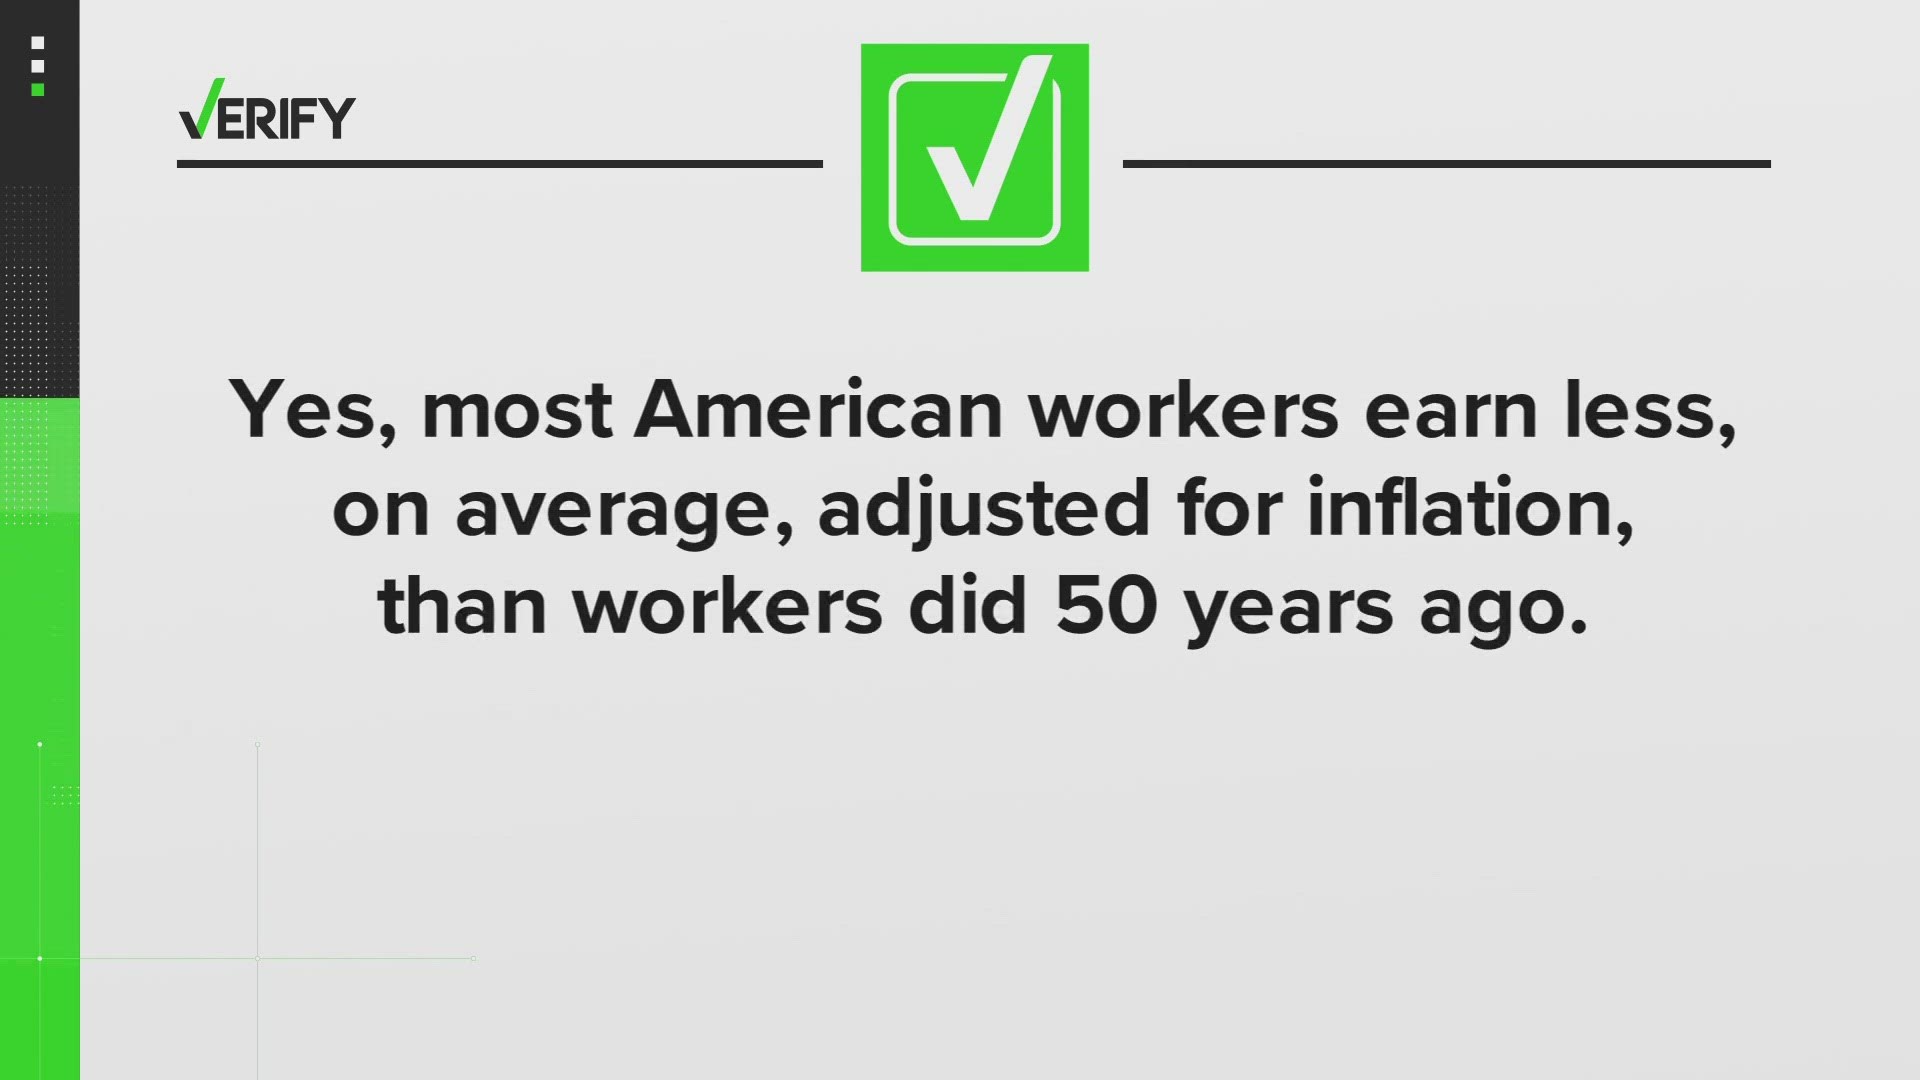 The Vermont Senator gave economic reasons when he introduced a bill to create a 32-hour week. We checked the data to see the conditions of today's American worker.